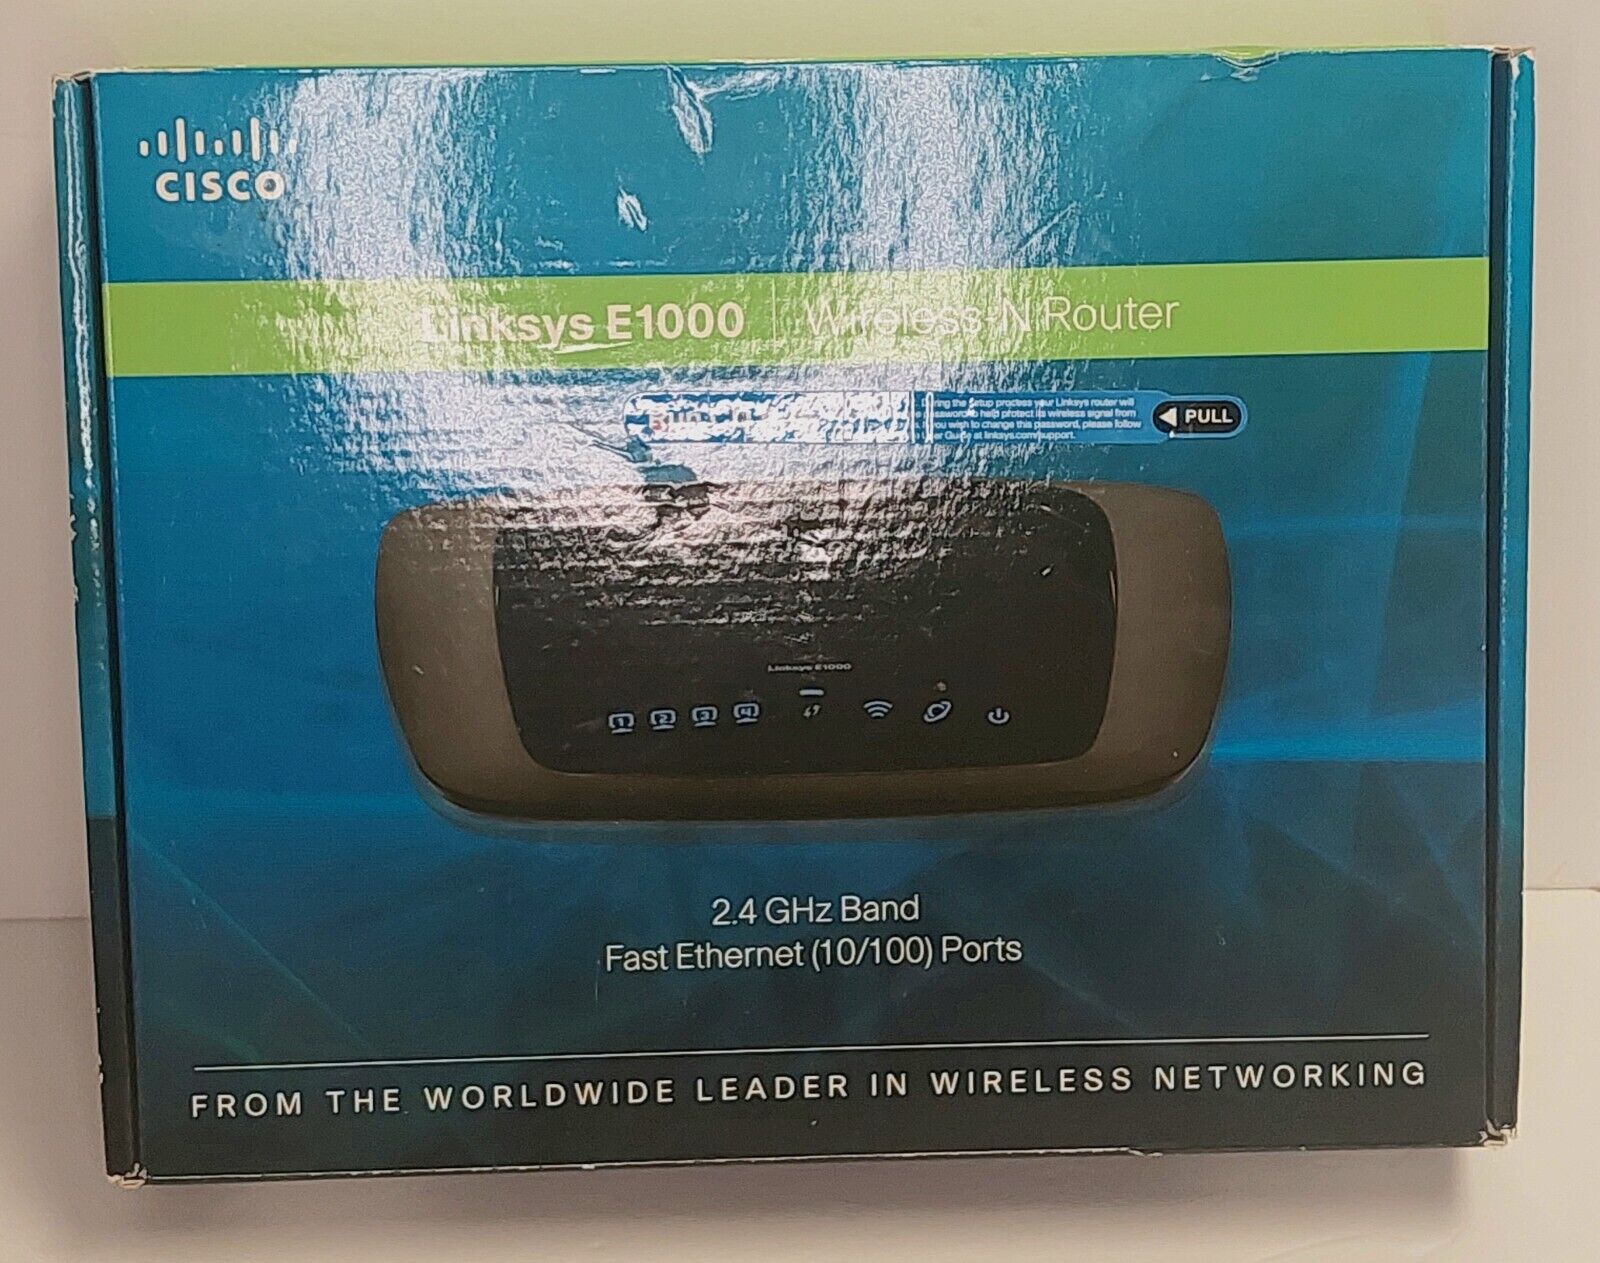 Linksys E1000 300 Mbps 4-Port 10/100 Wireless N Router